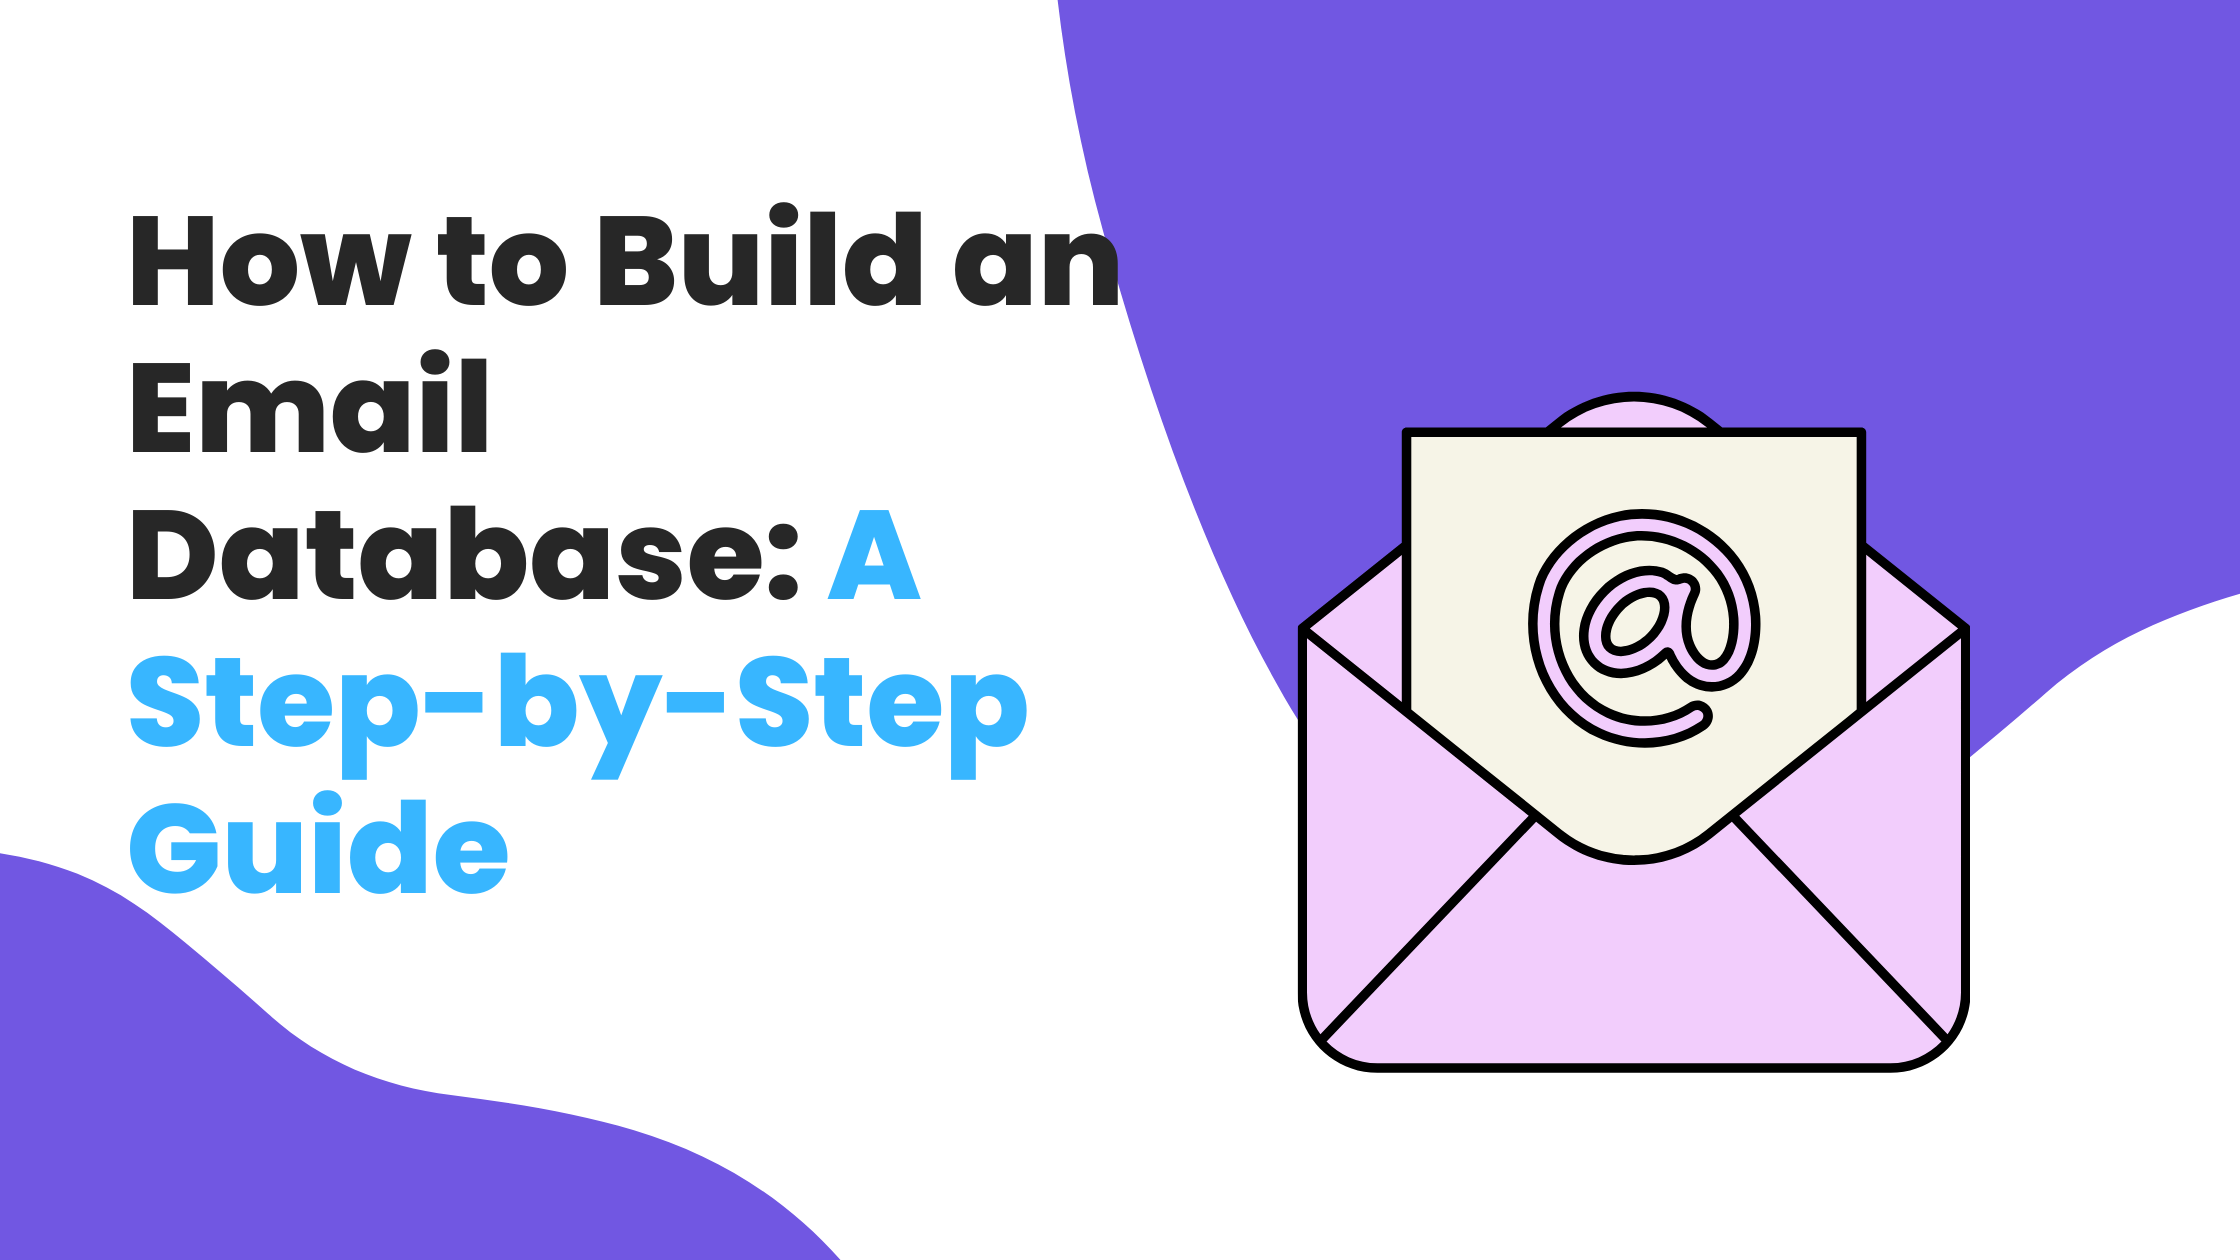 How to Build an Email Database: A Step-by-Step Guide